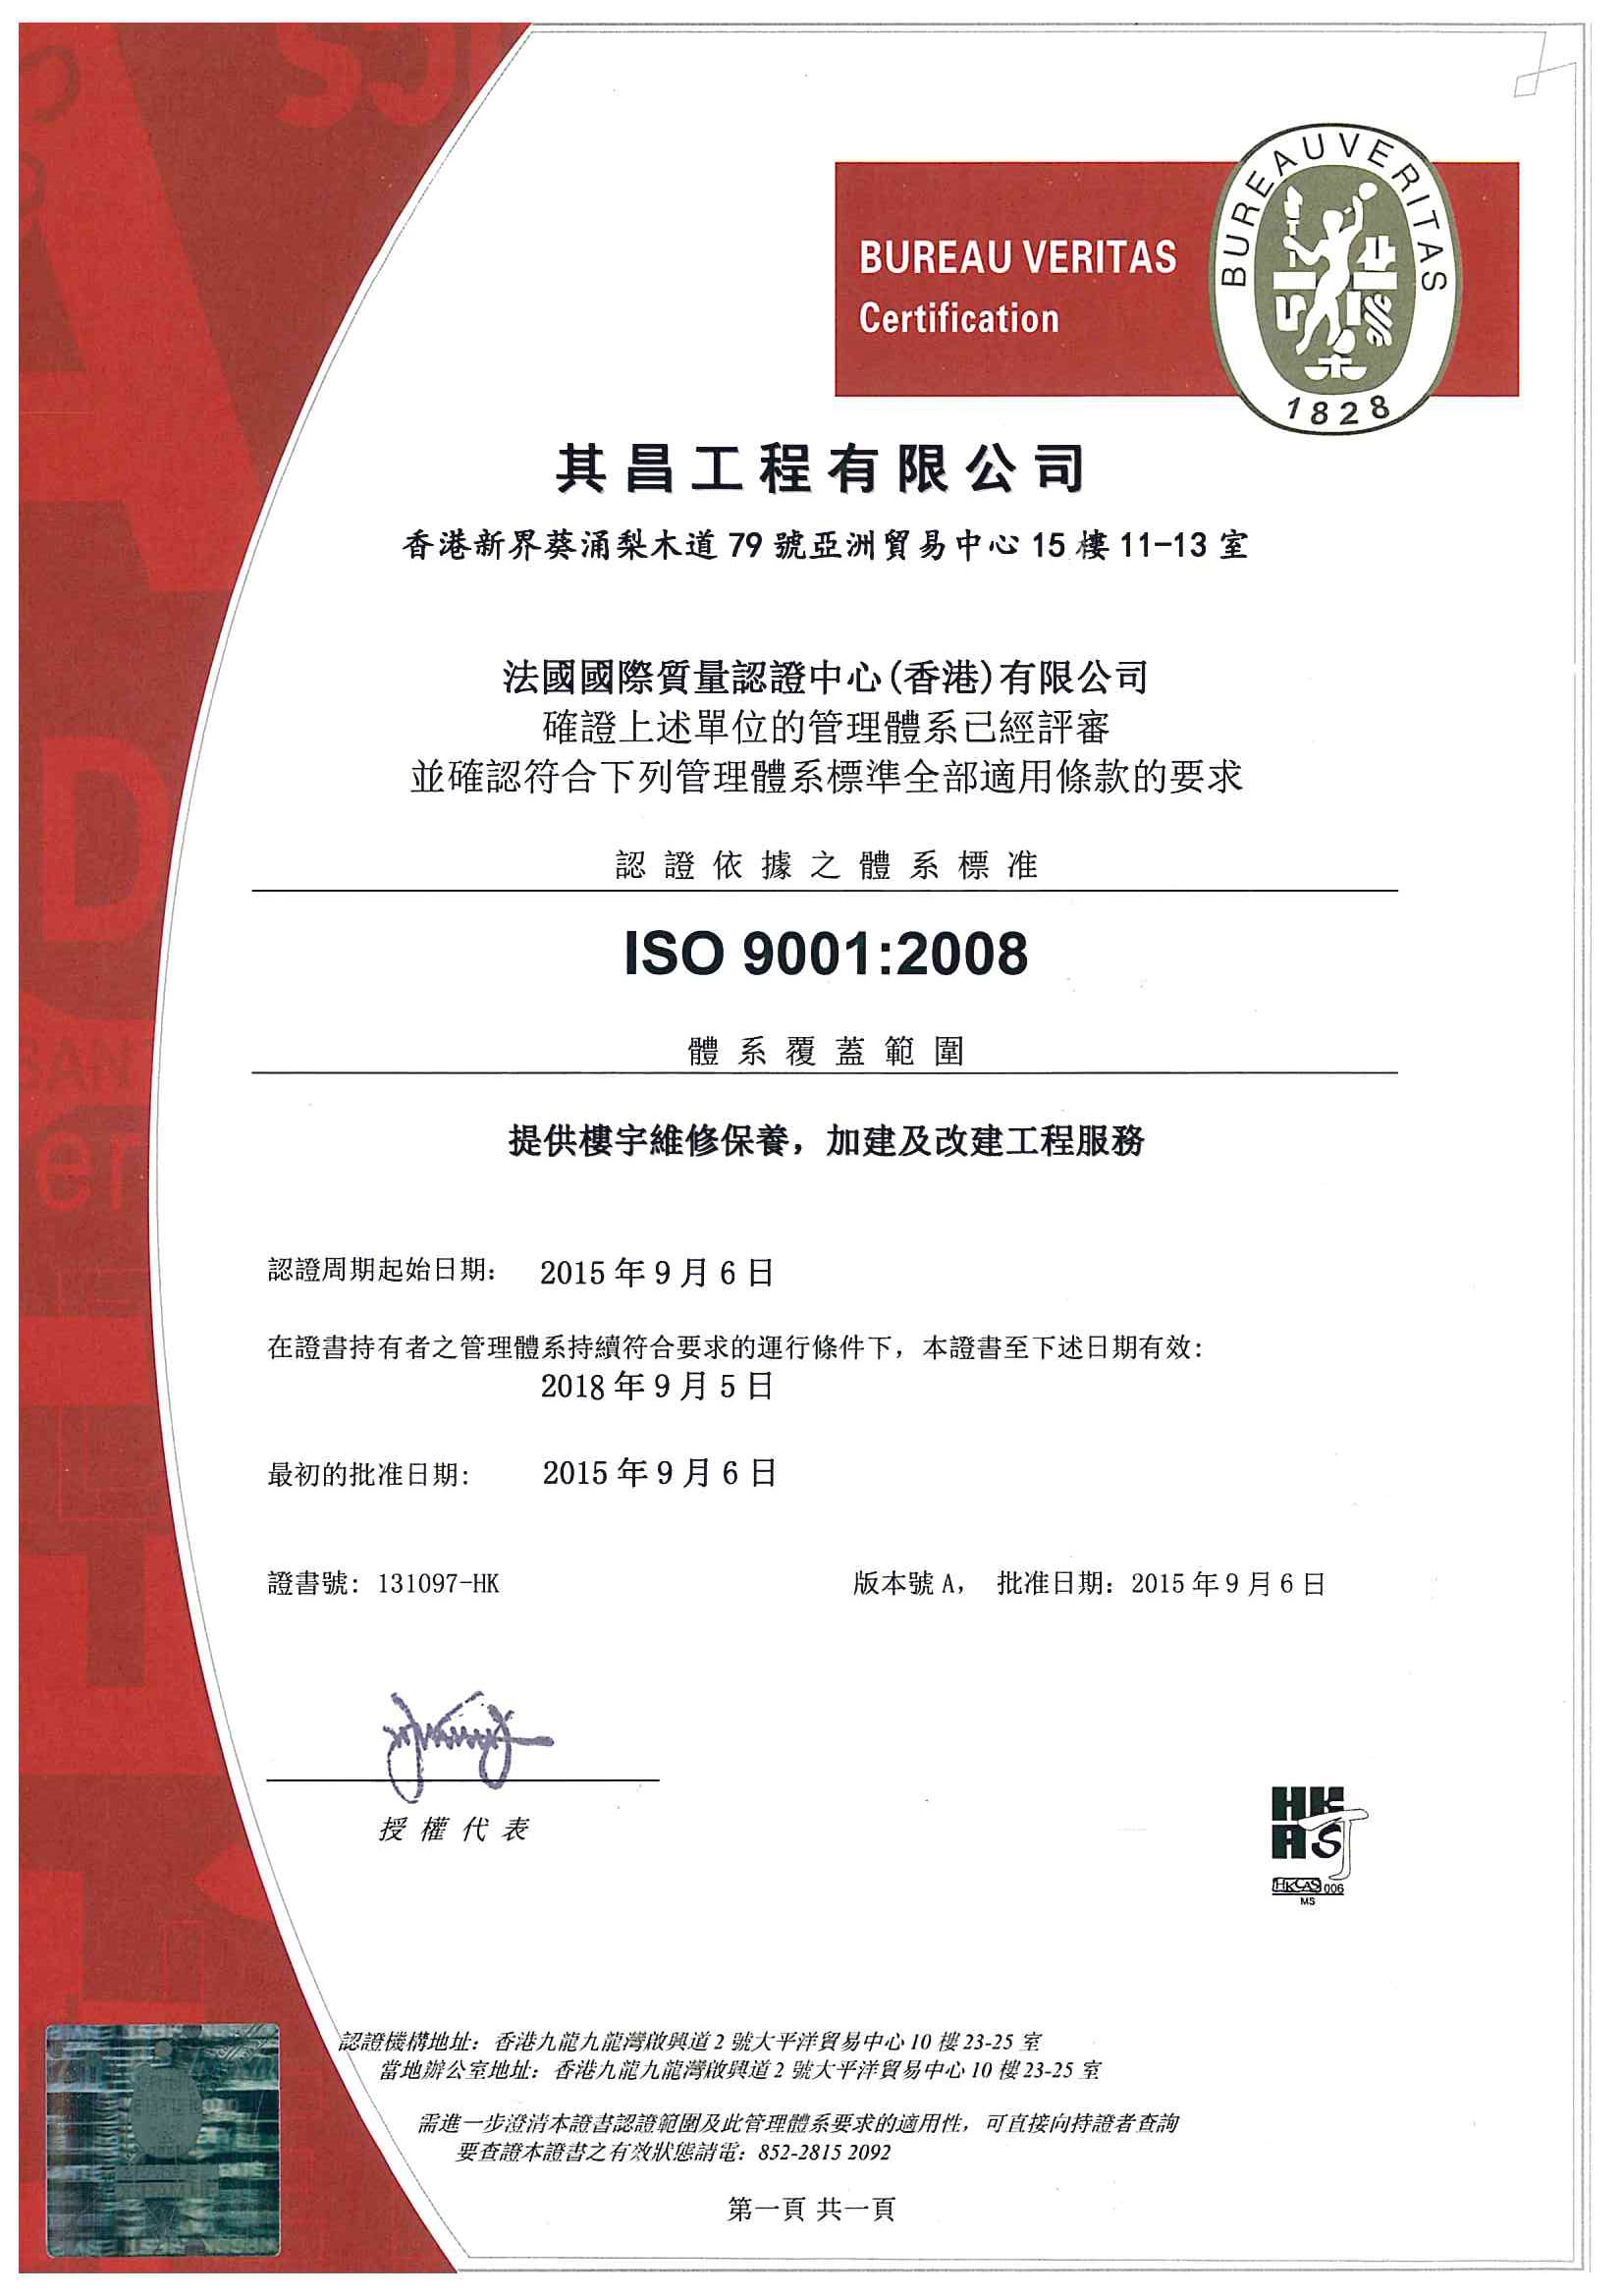 Cert ISO9001 KCECL 20150906 20180905 Chi